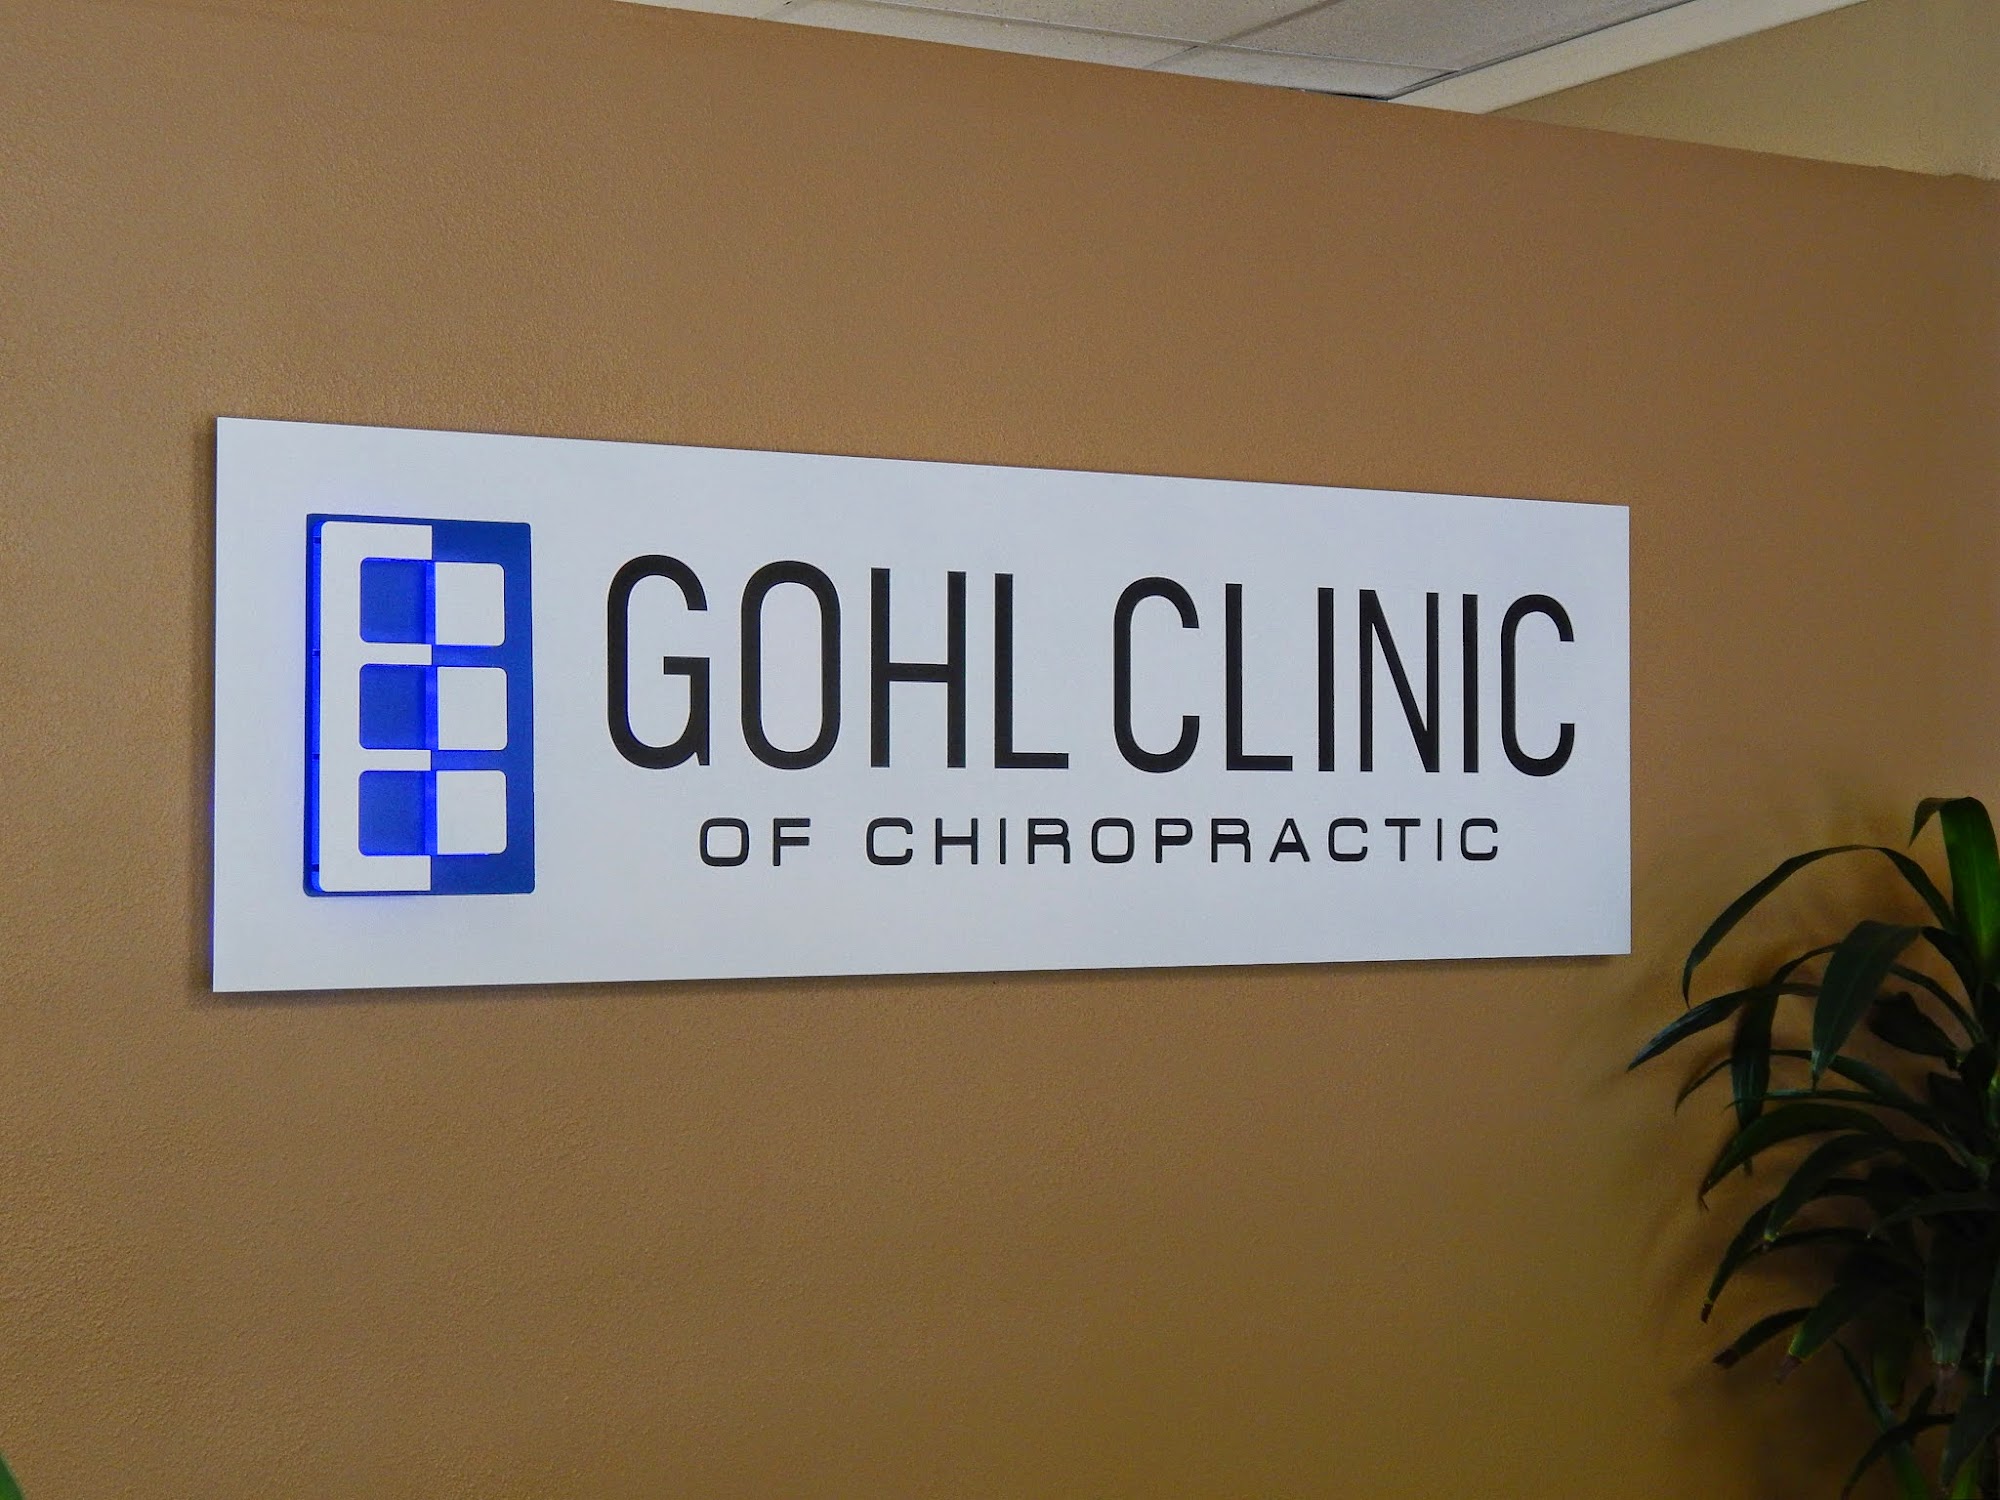 Gohl Clinic Of Chiropractic